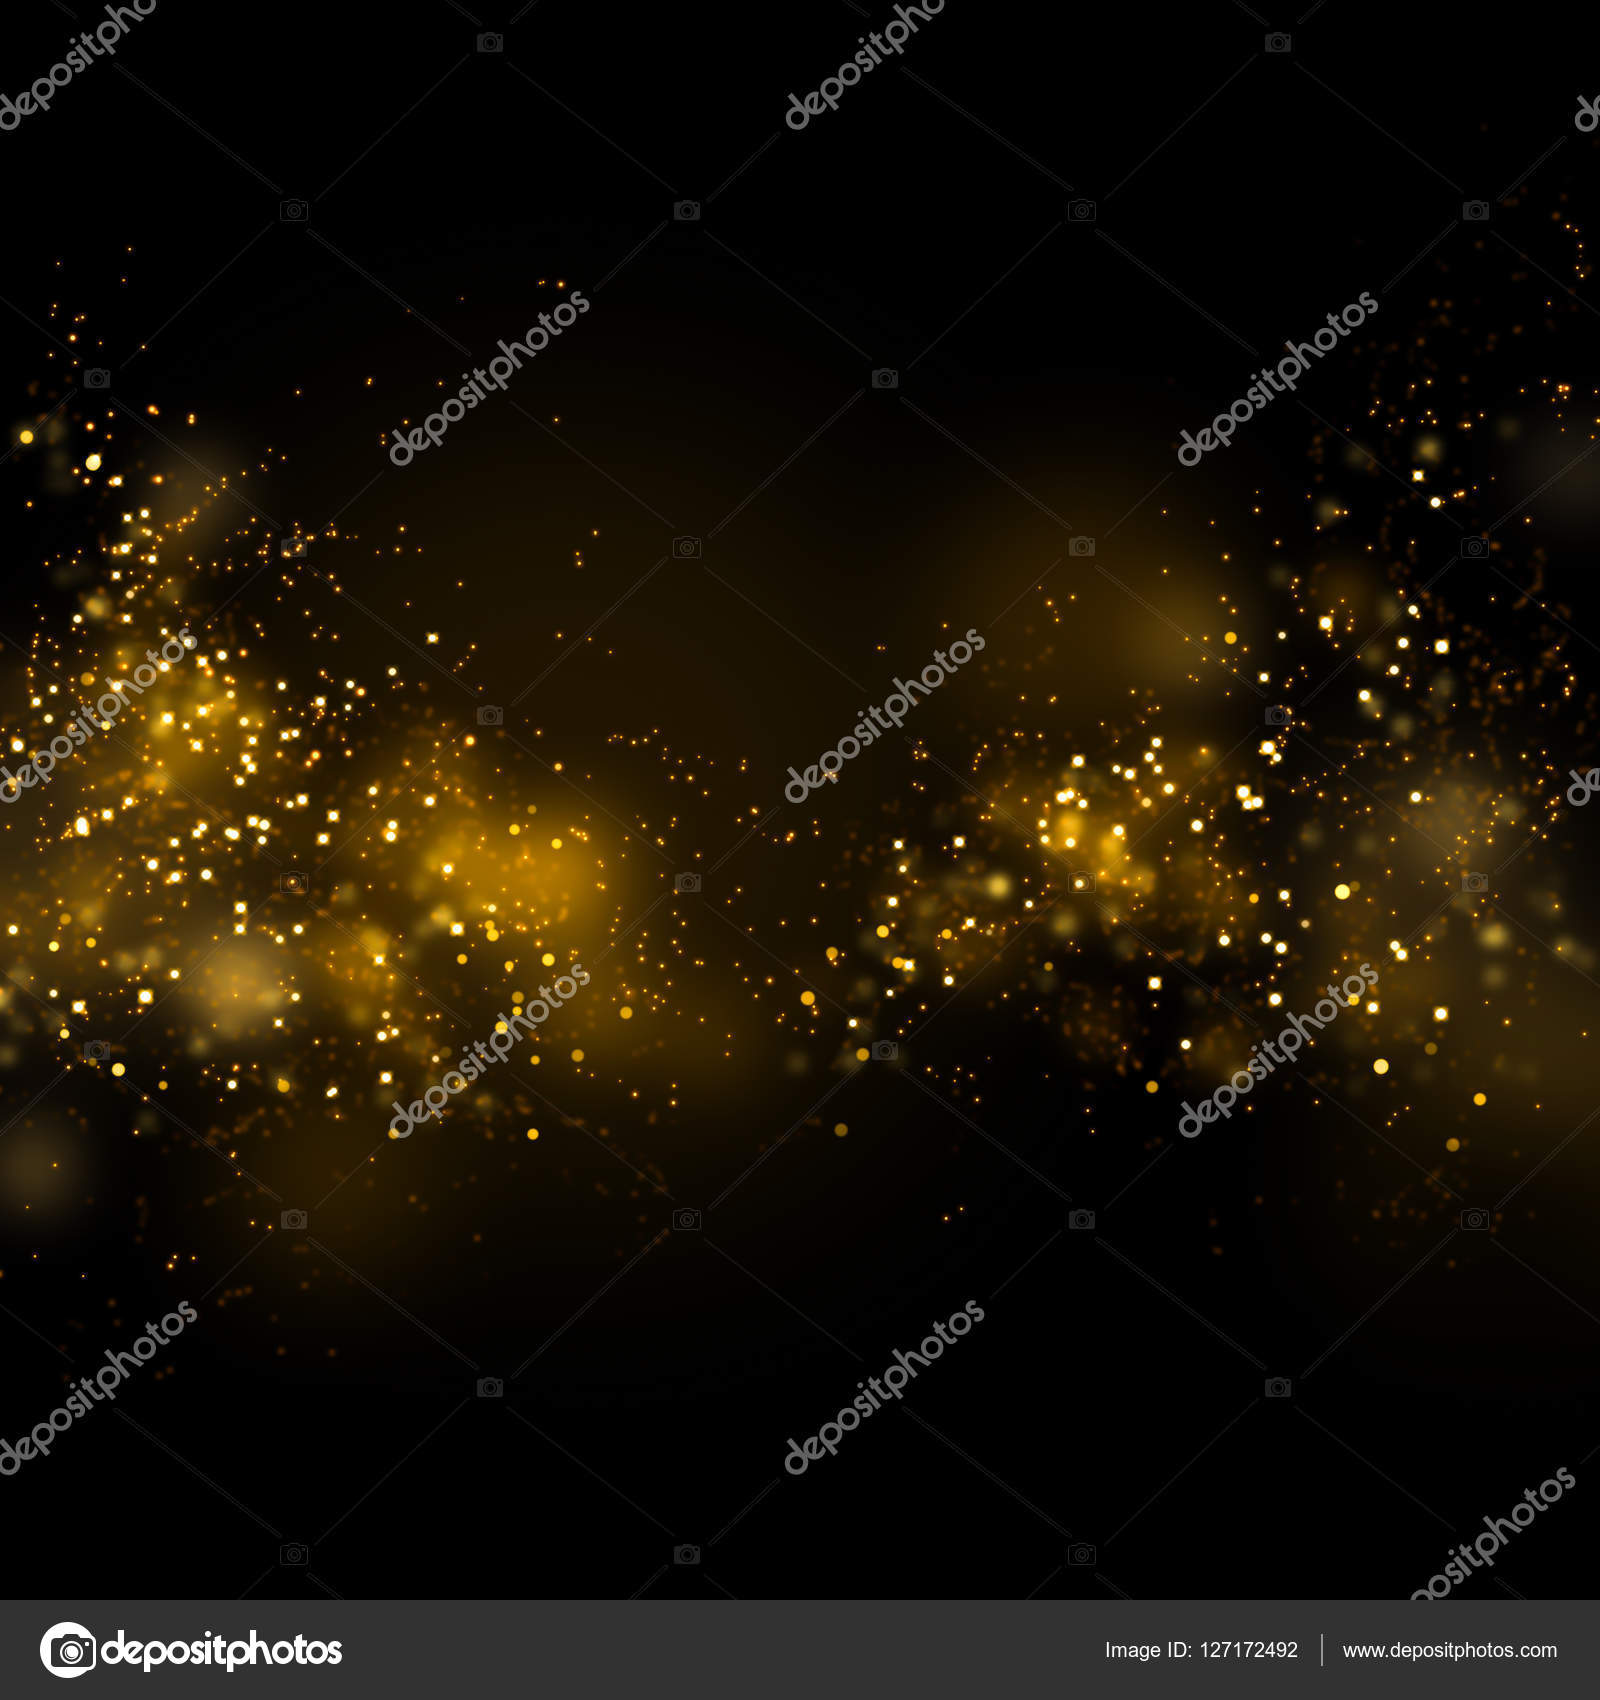 Gold glittering star magic dust on background. Stock Photo by